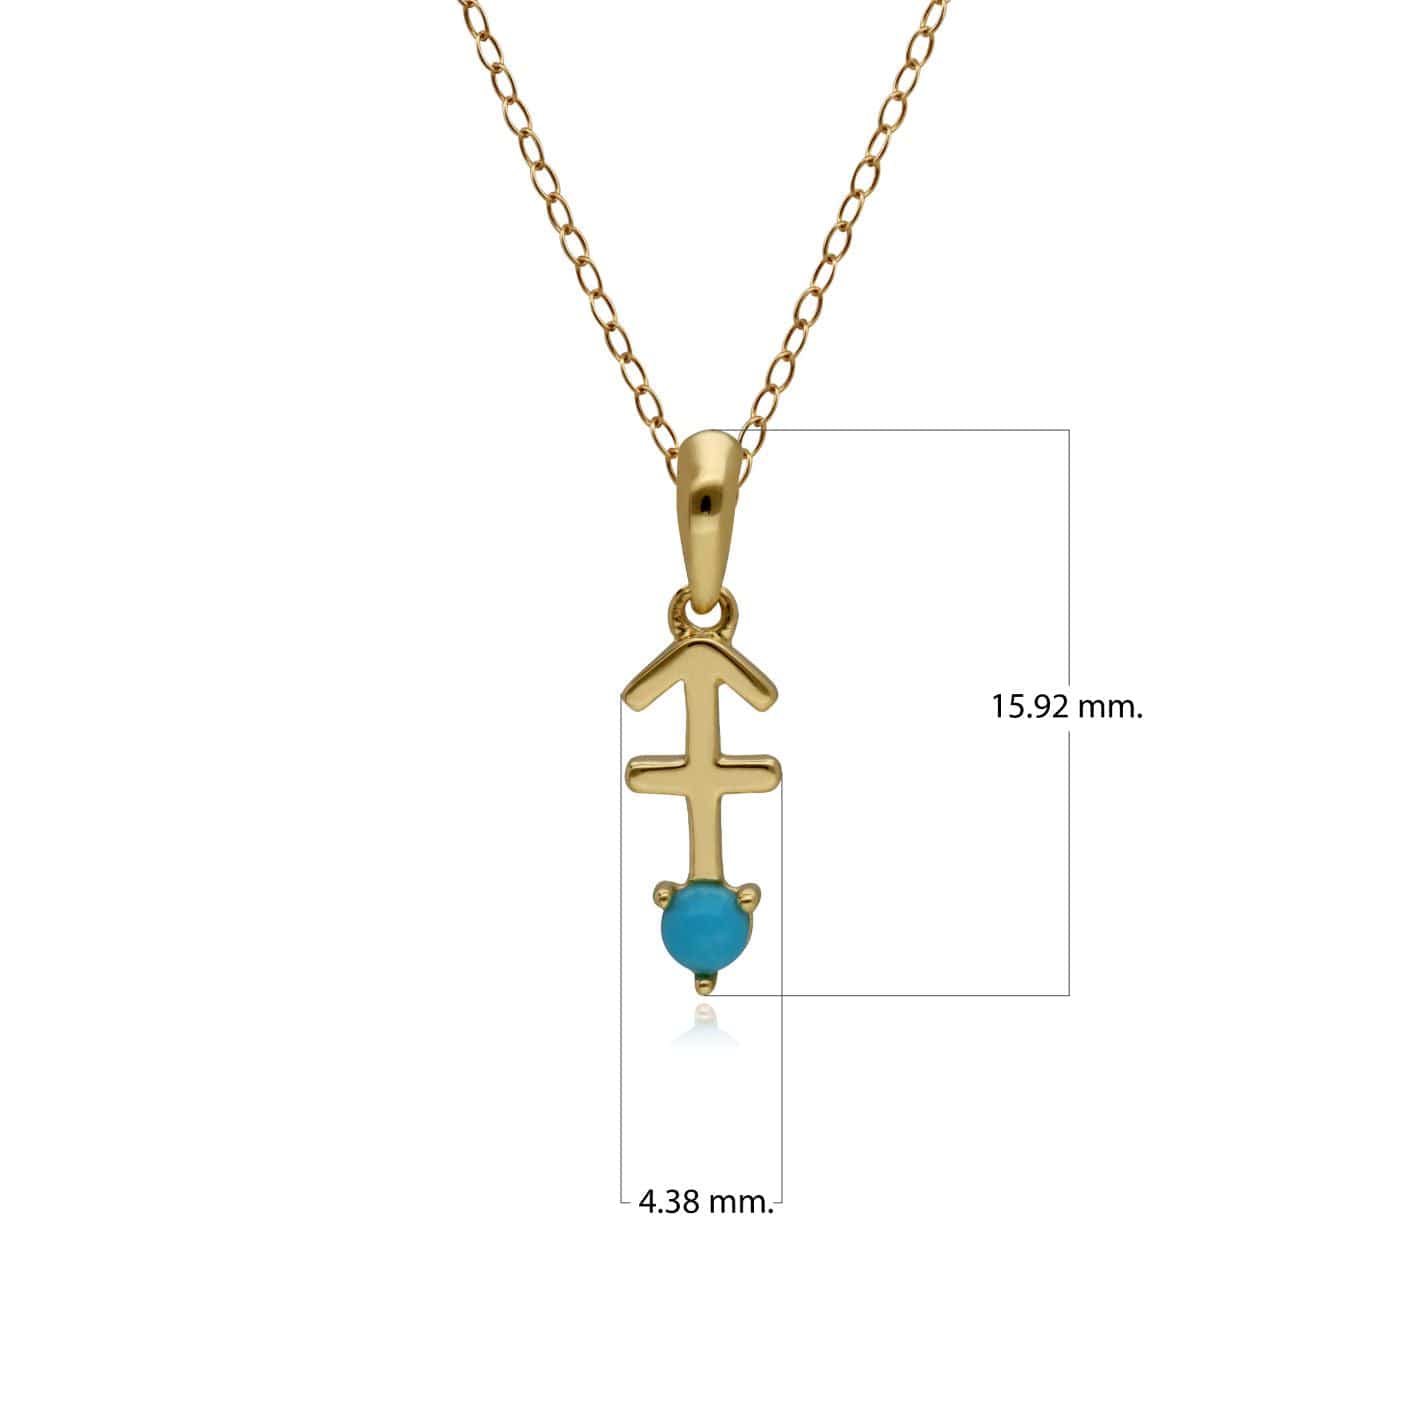 135P2003019 Turquoise Sagittarius Zodiac Charm Necklace in 9ct Yellow Gold 3